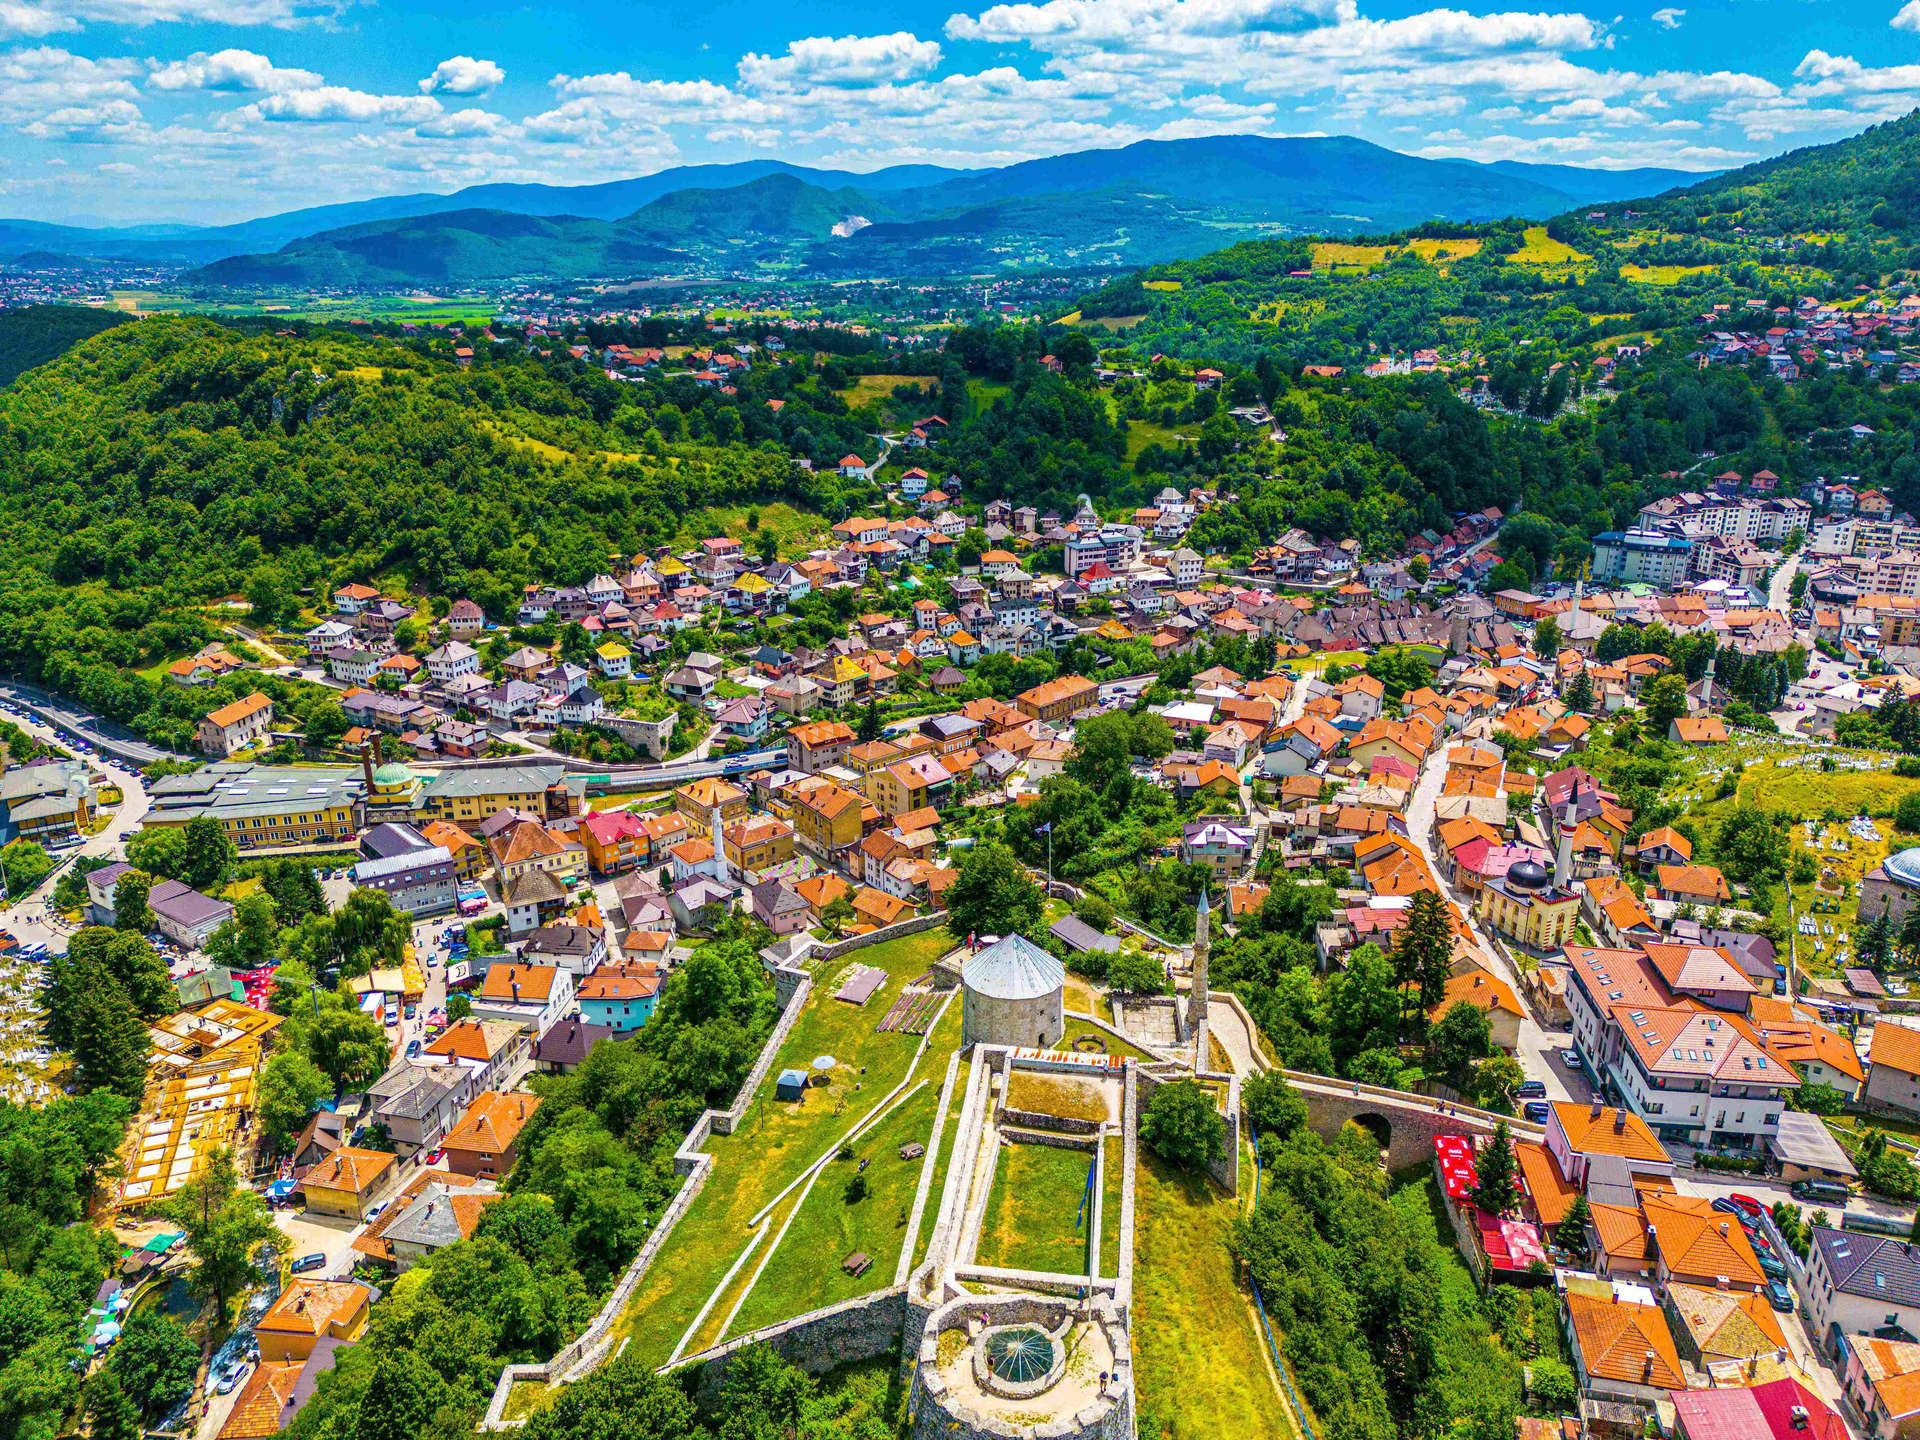 Aerial view of the picturesque Town of Travnik, Bosnia and Herzegovina